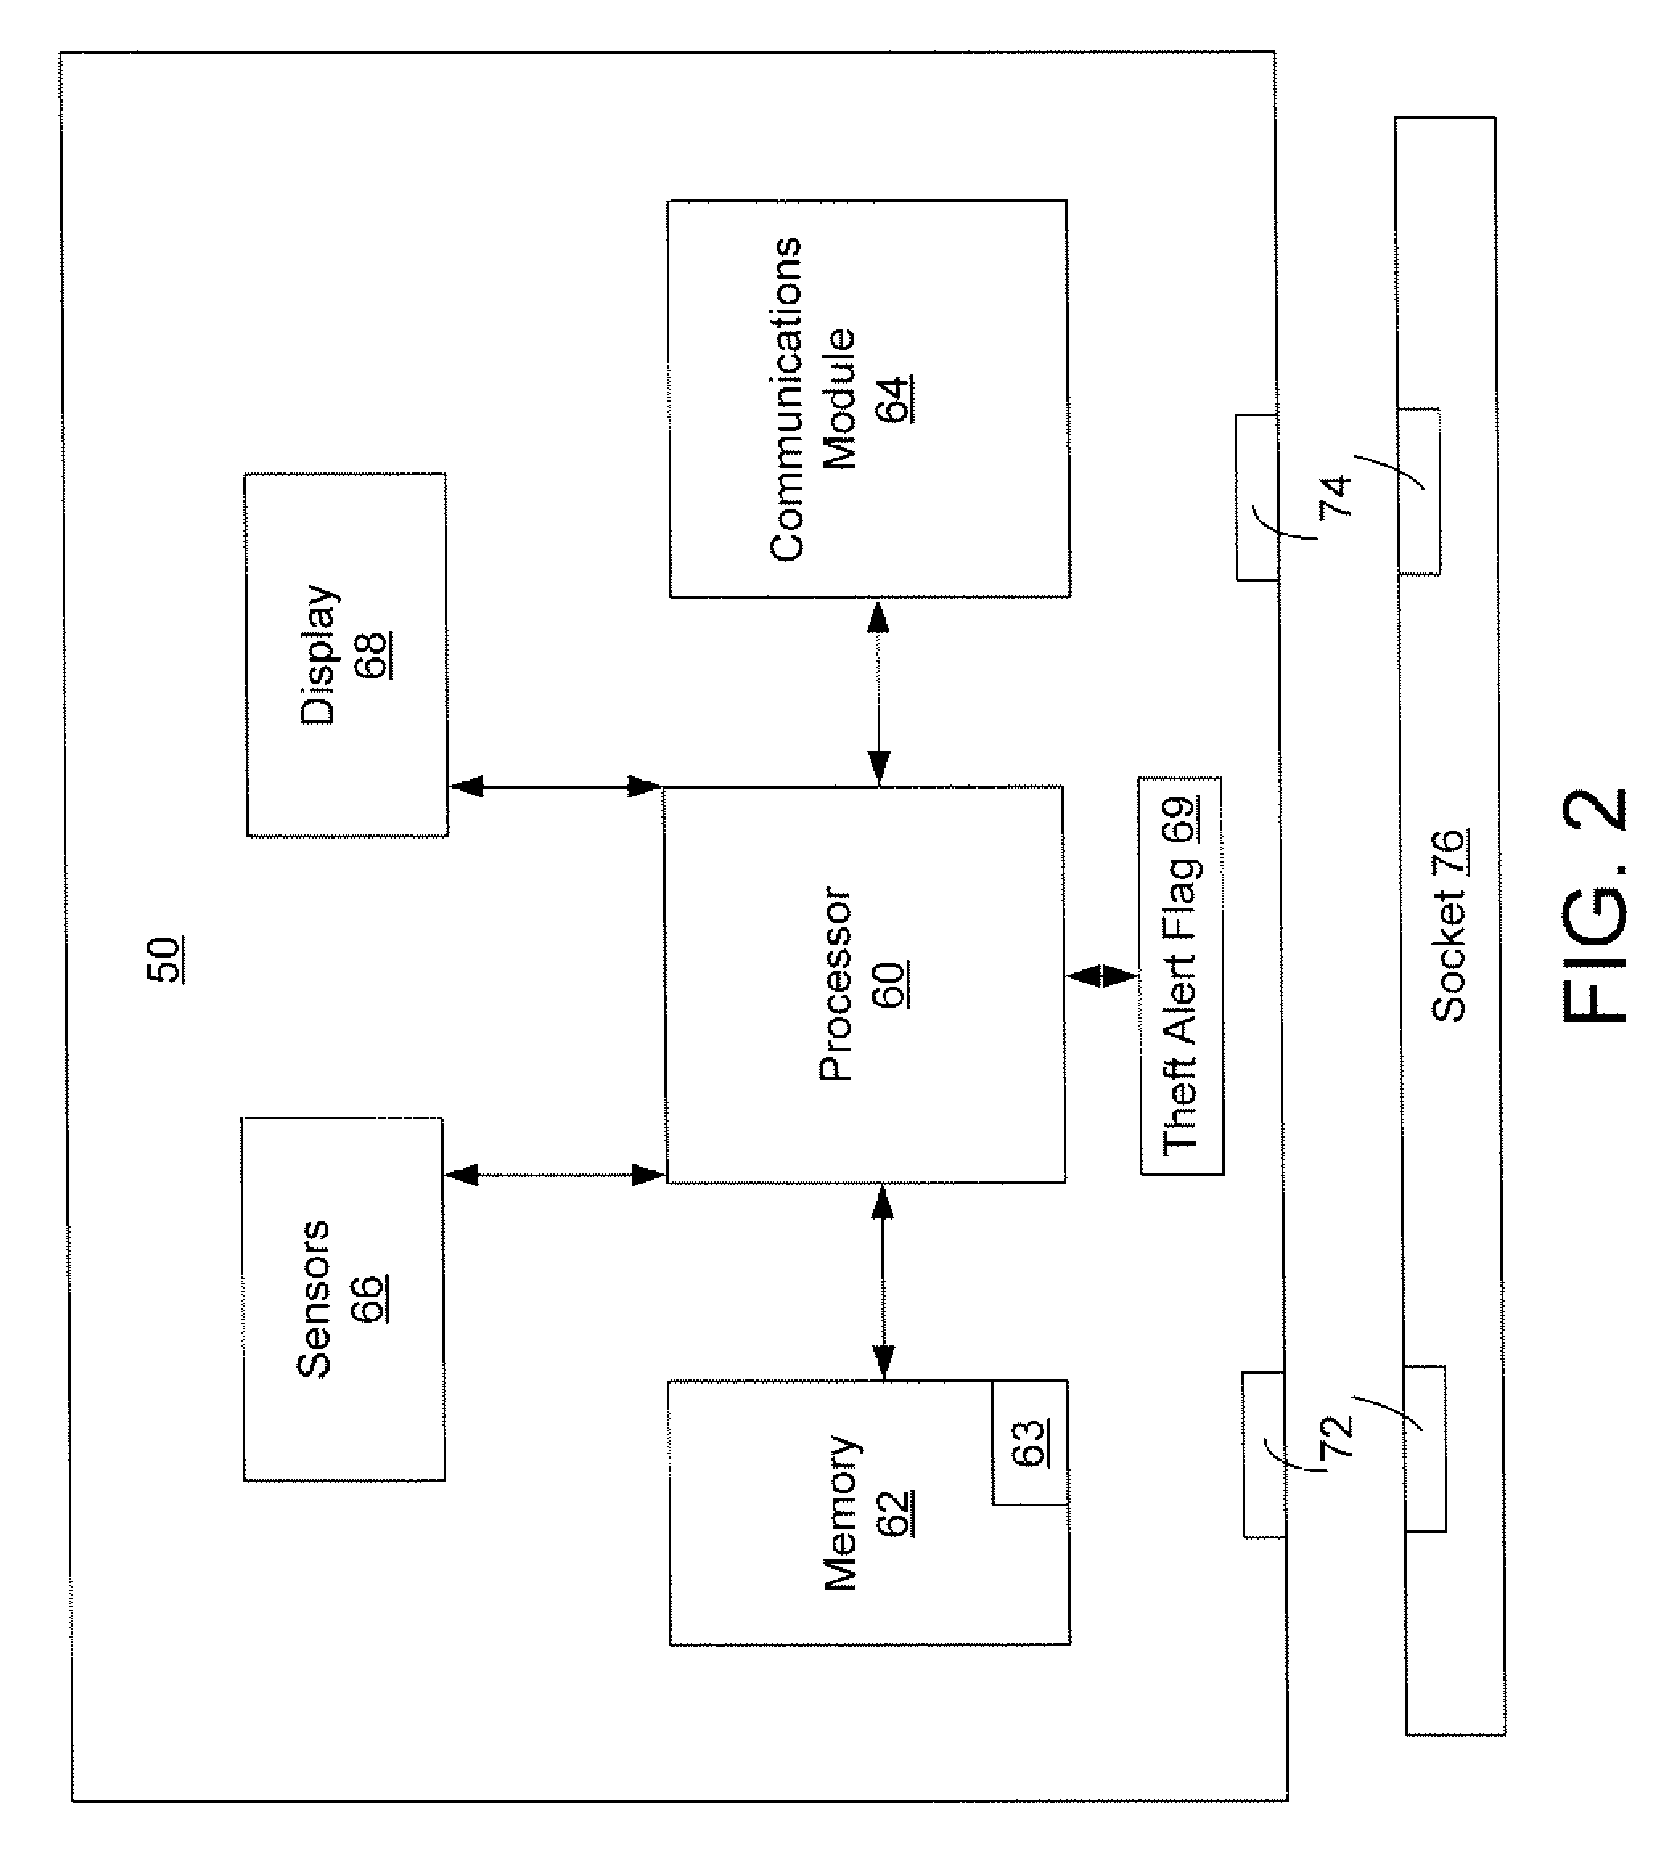 Systems, methods, and apparatuses for detecting residential electricity theft in firmware